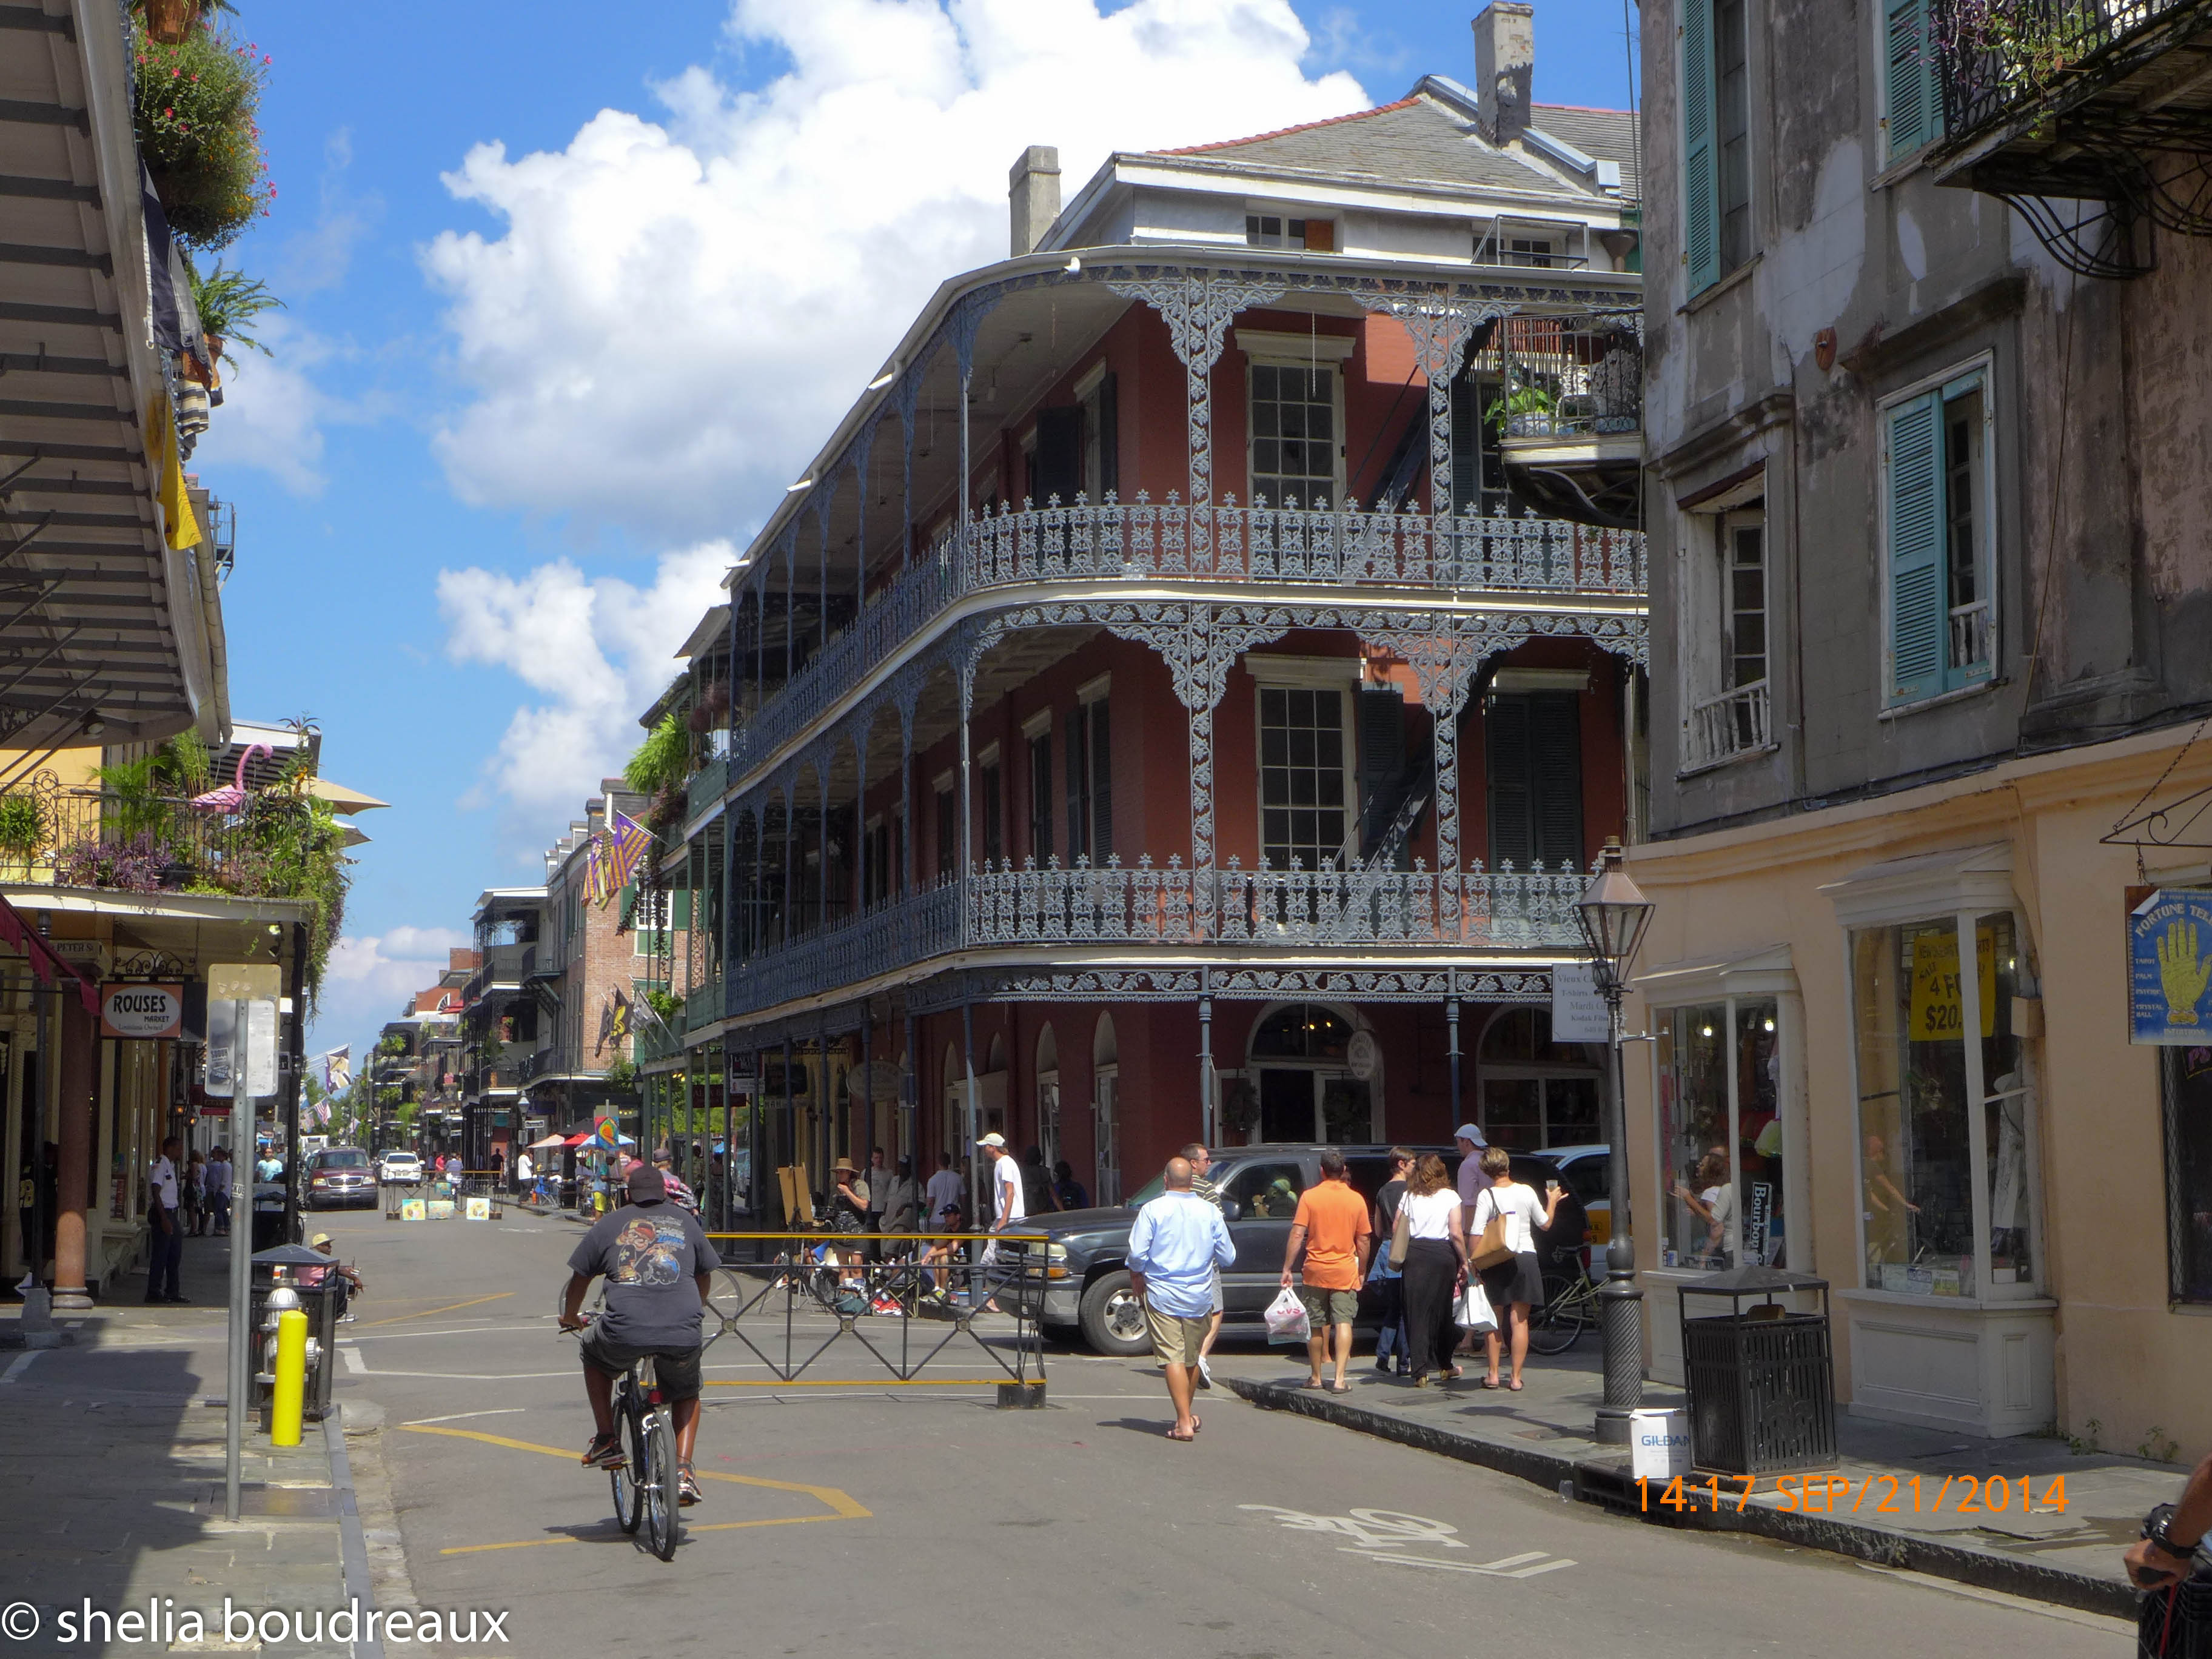 This is typical French Quarter architecture.  The Spanish occupied Louisiana and had much influence on the way the balconies were done.  This style can be seen in parts of Spain now days as well. 